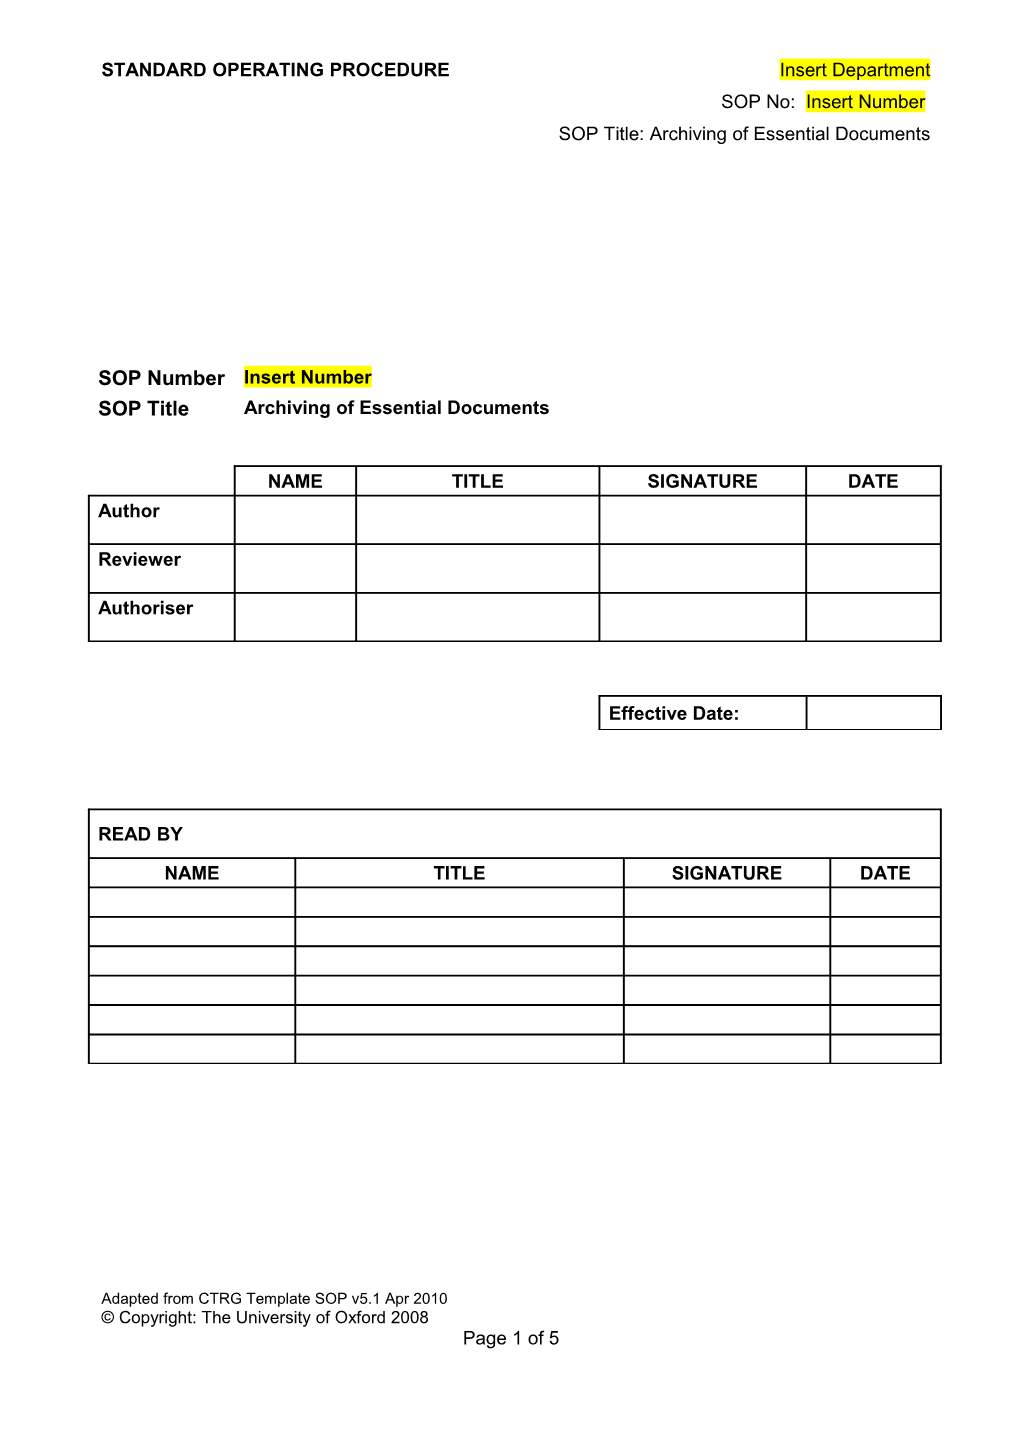 Archiving of Essential Documents - Template